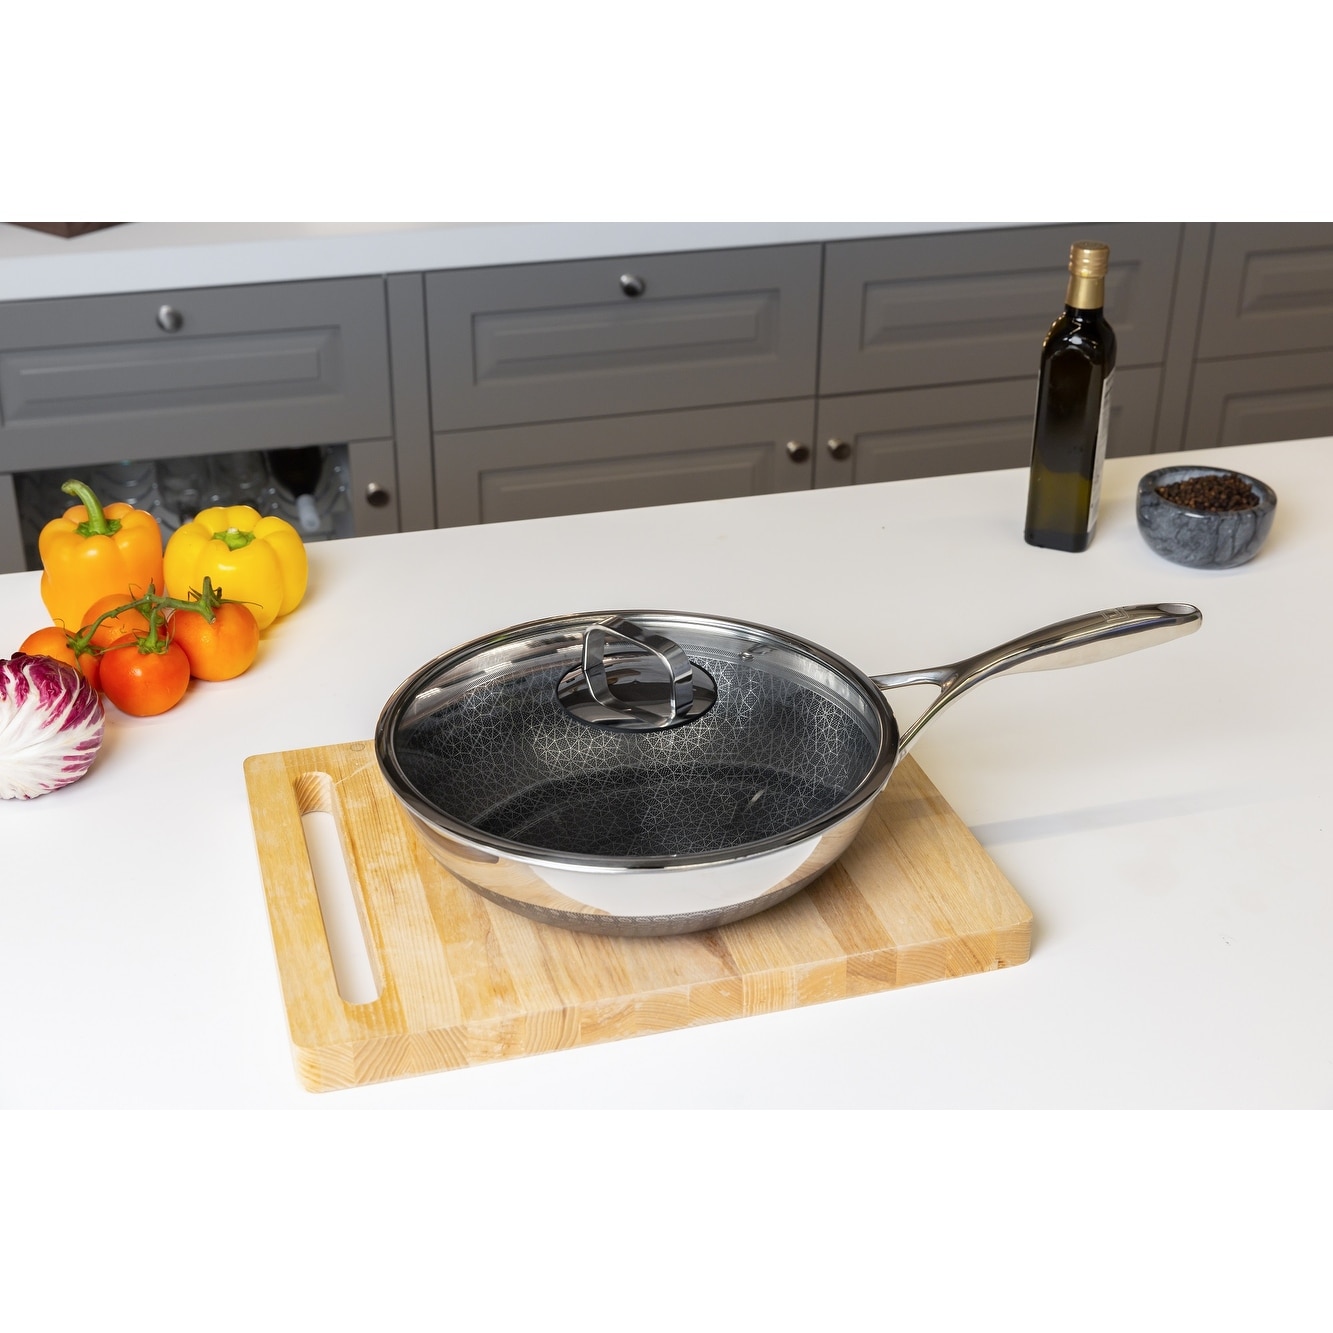  HexClad Hybrid Nonstick 14-Wok with Tempered Glass Lid